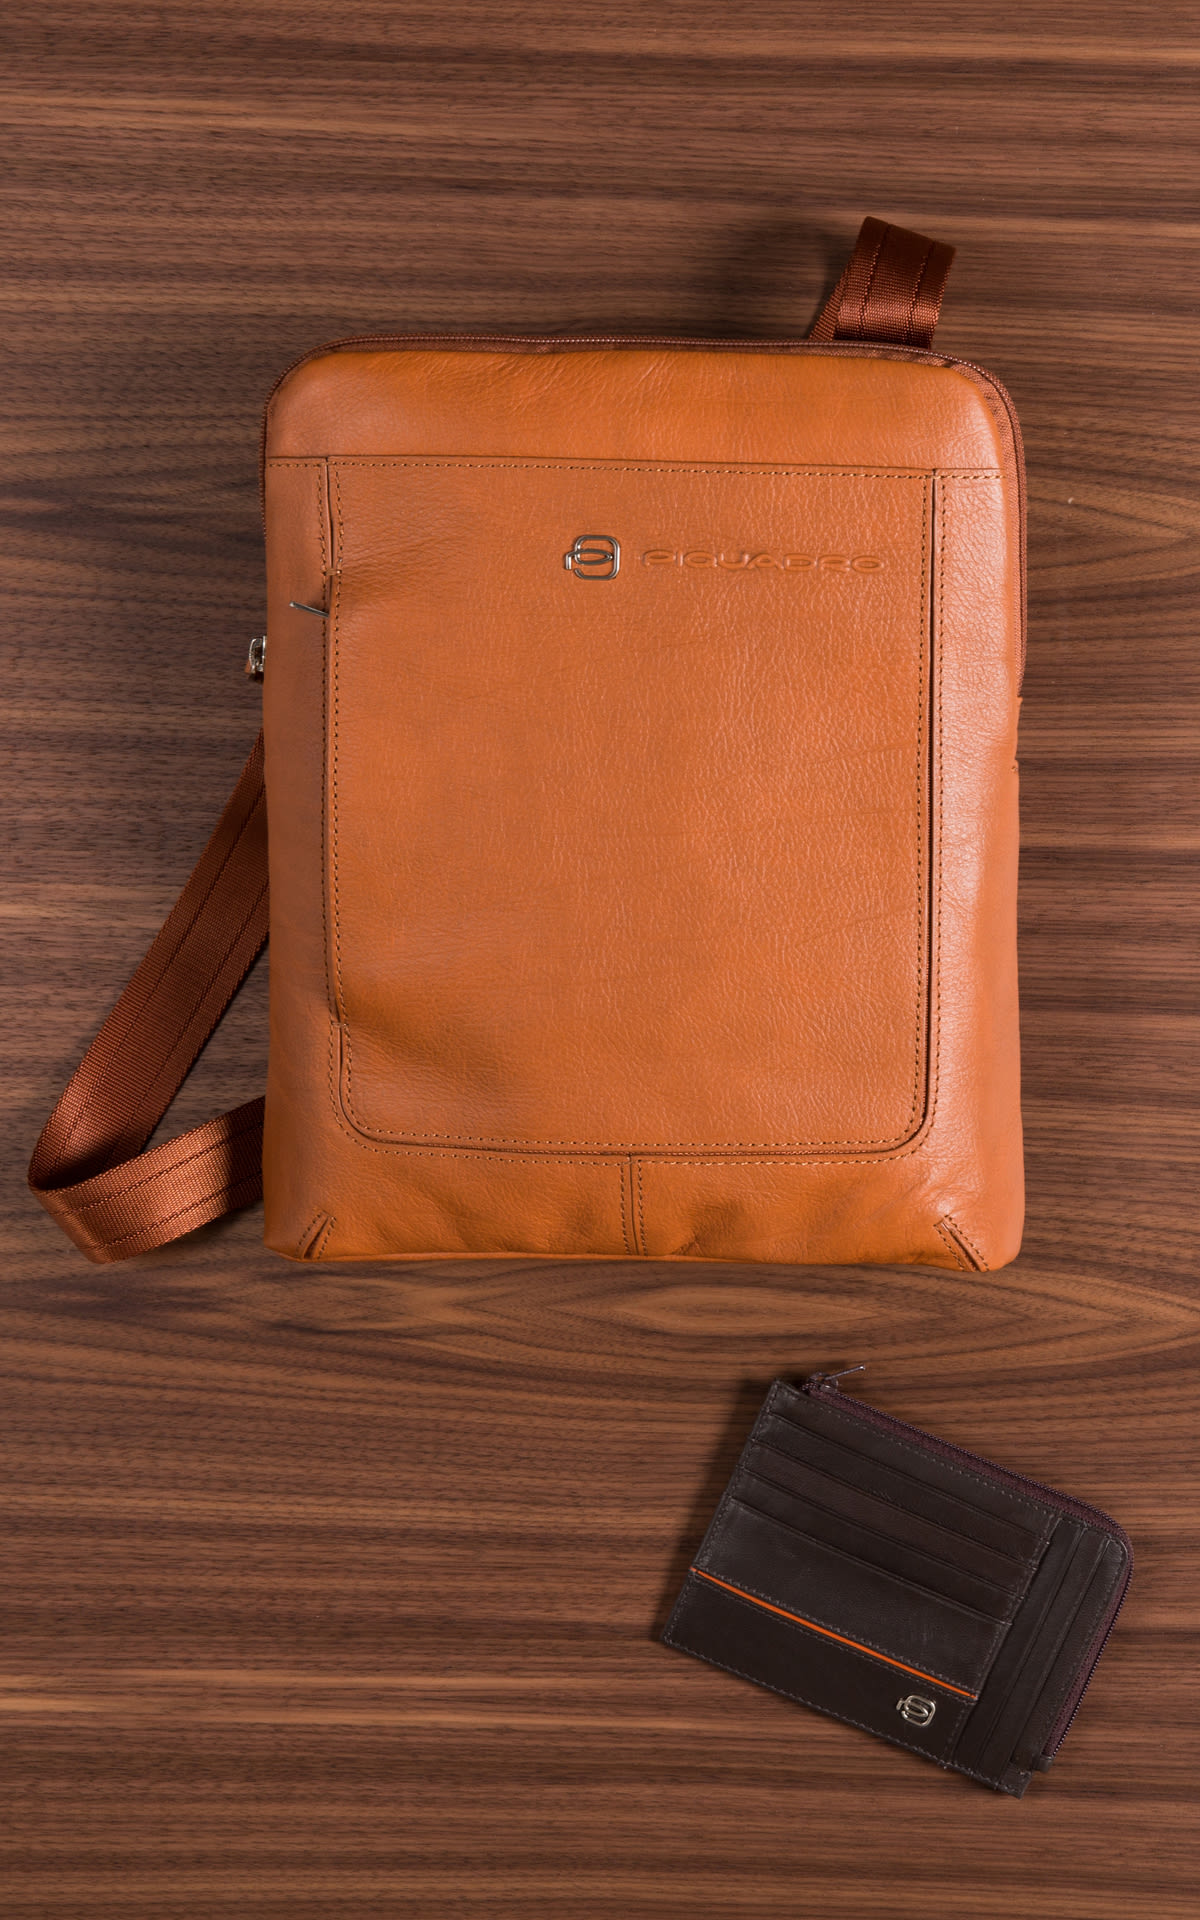 Men's camel leather bag and wallet from Piquadro